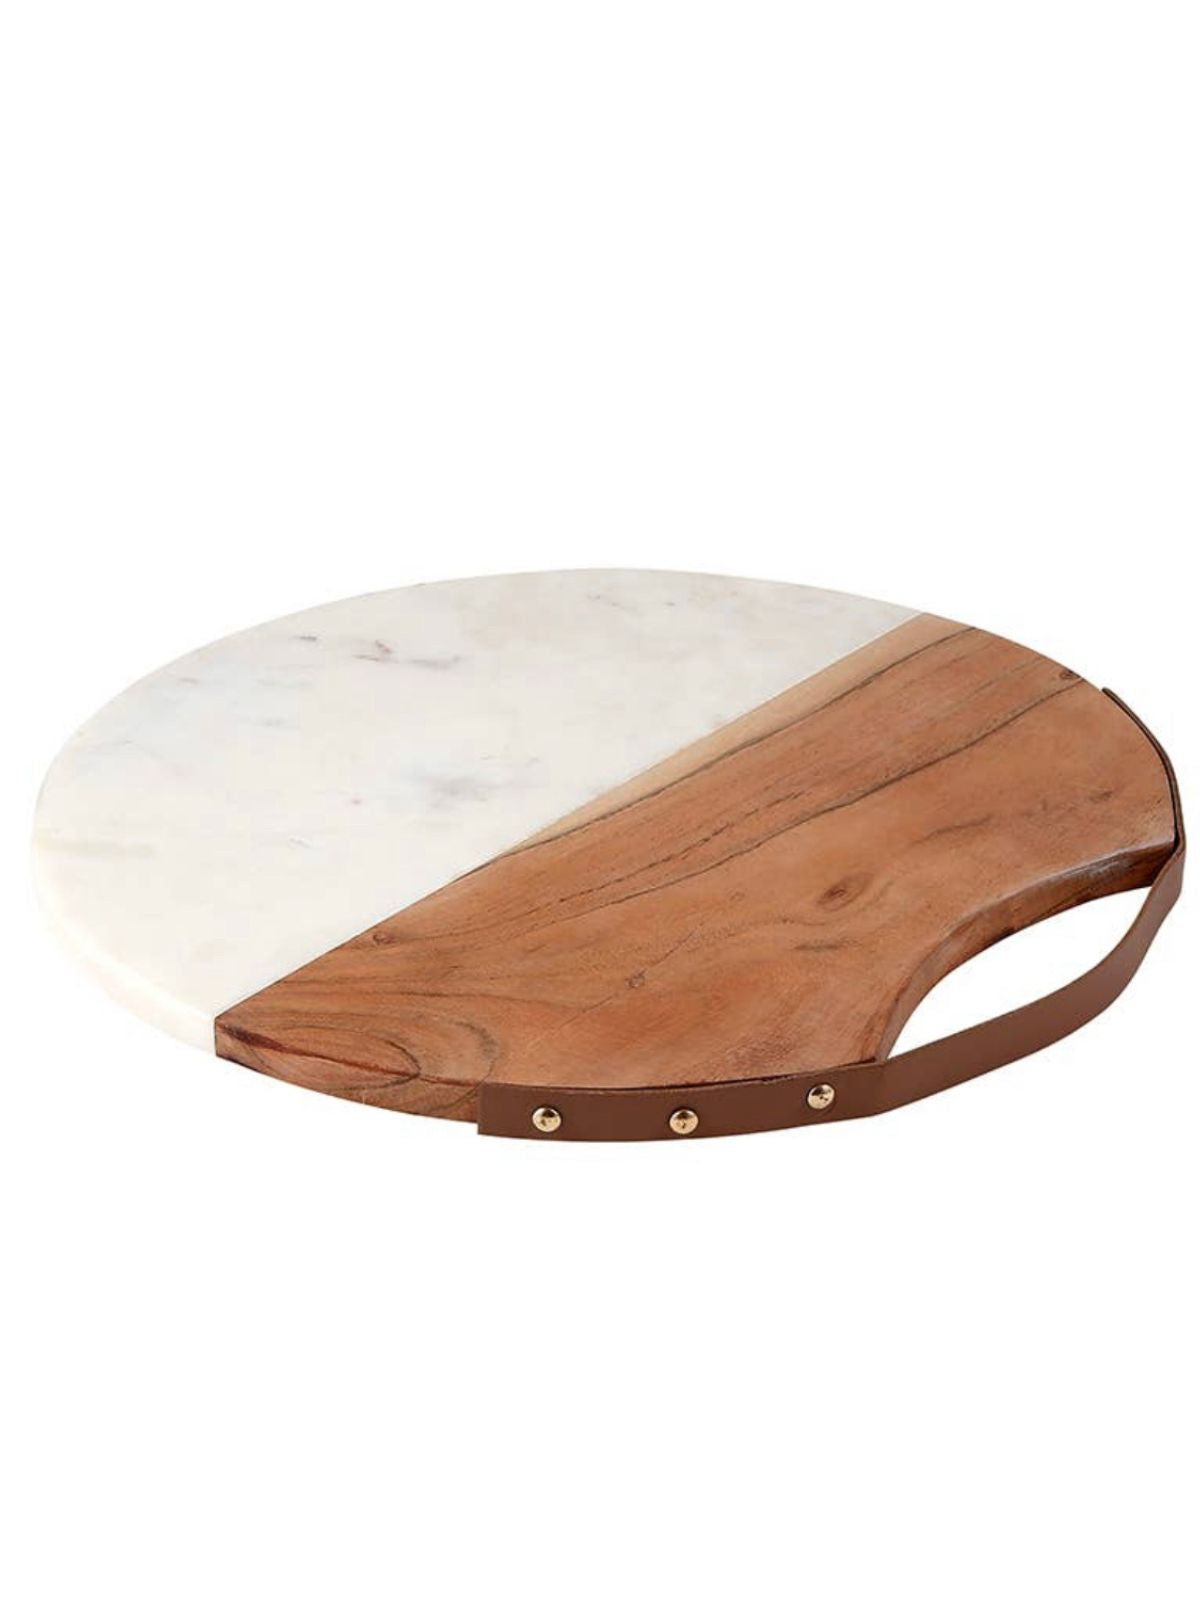 Round Marble and Acacia Wood Serving Board, 14D